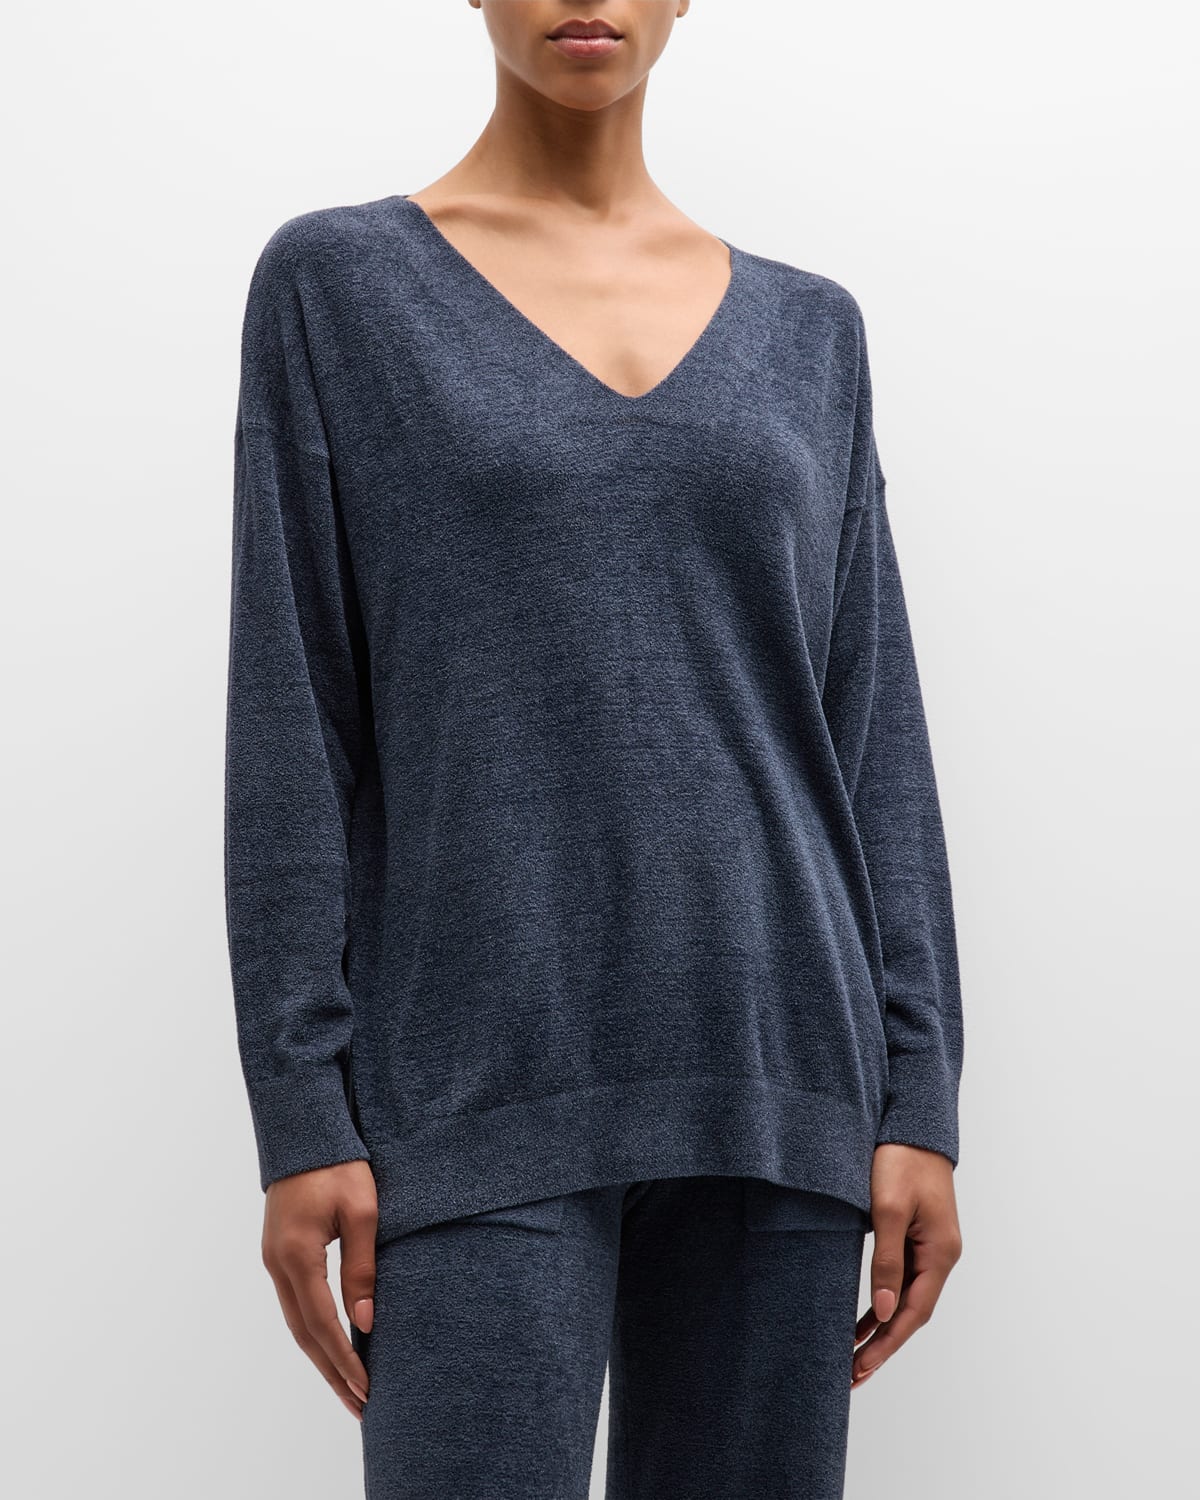 BAREFOOT DREAMS COZYCHIC ULTRA LITE HIGH-LOW PULLOVER